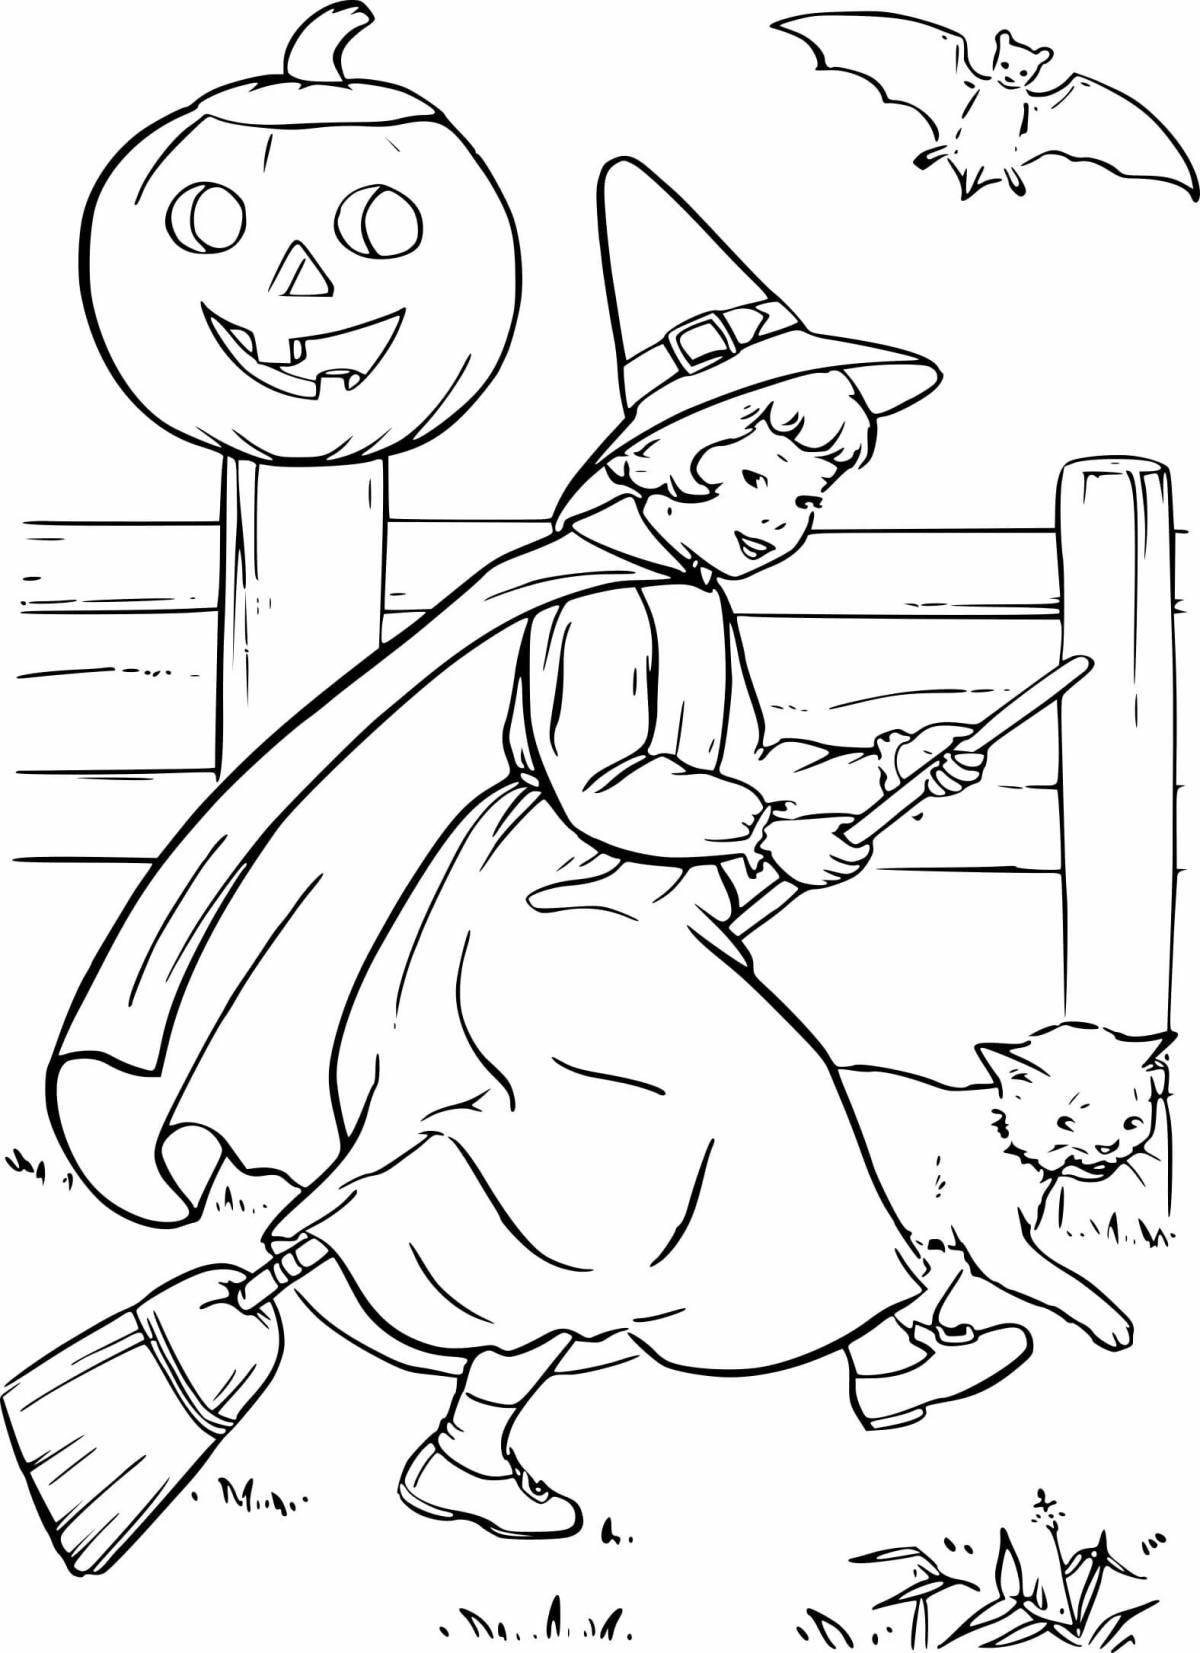 Playful halloween coloring book for girls